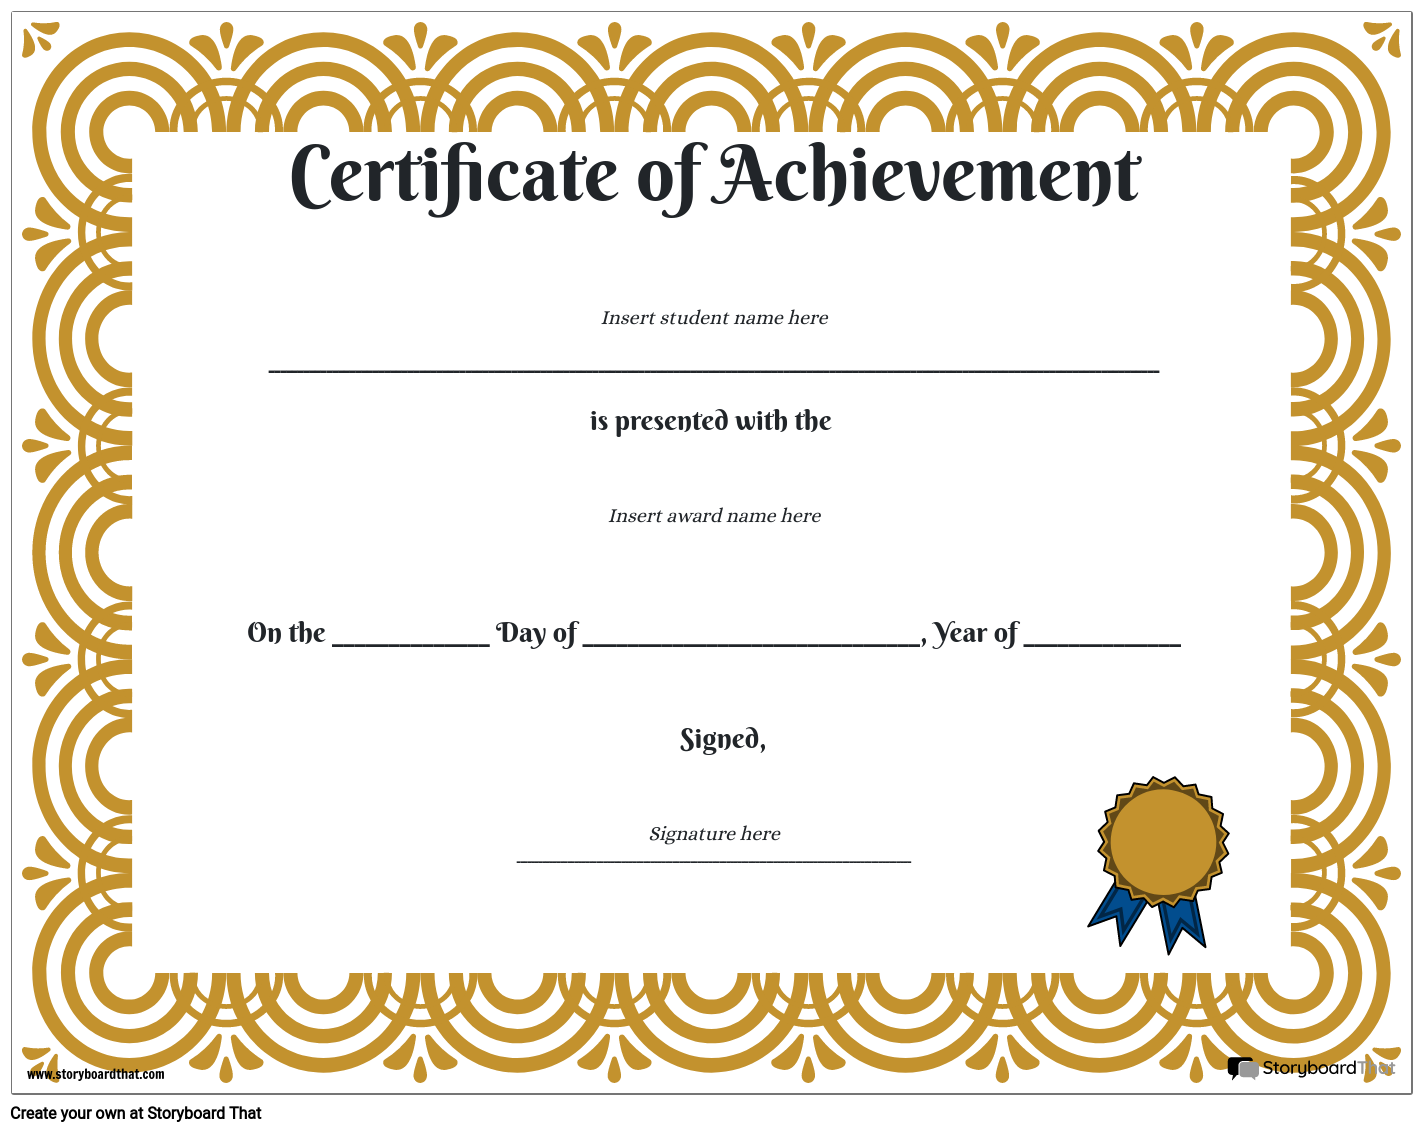 Free Printable Student Certificate And Award Templates - Free Printable Award Certificates